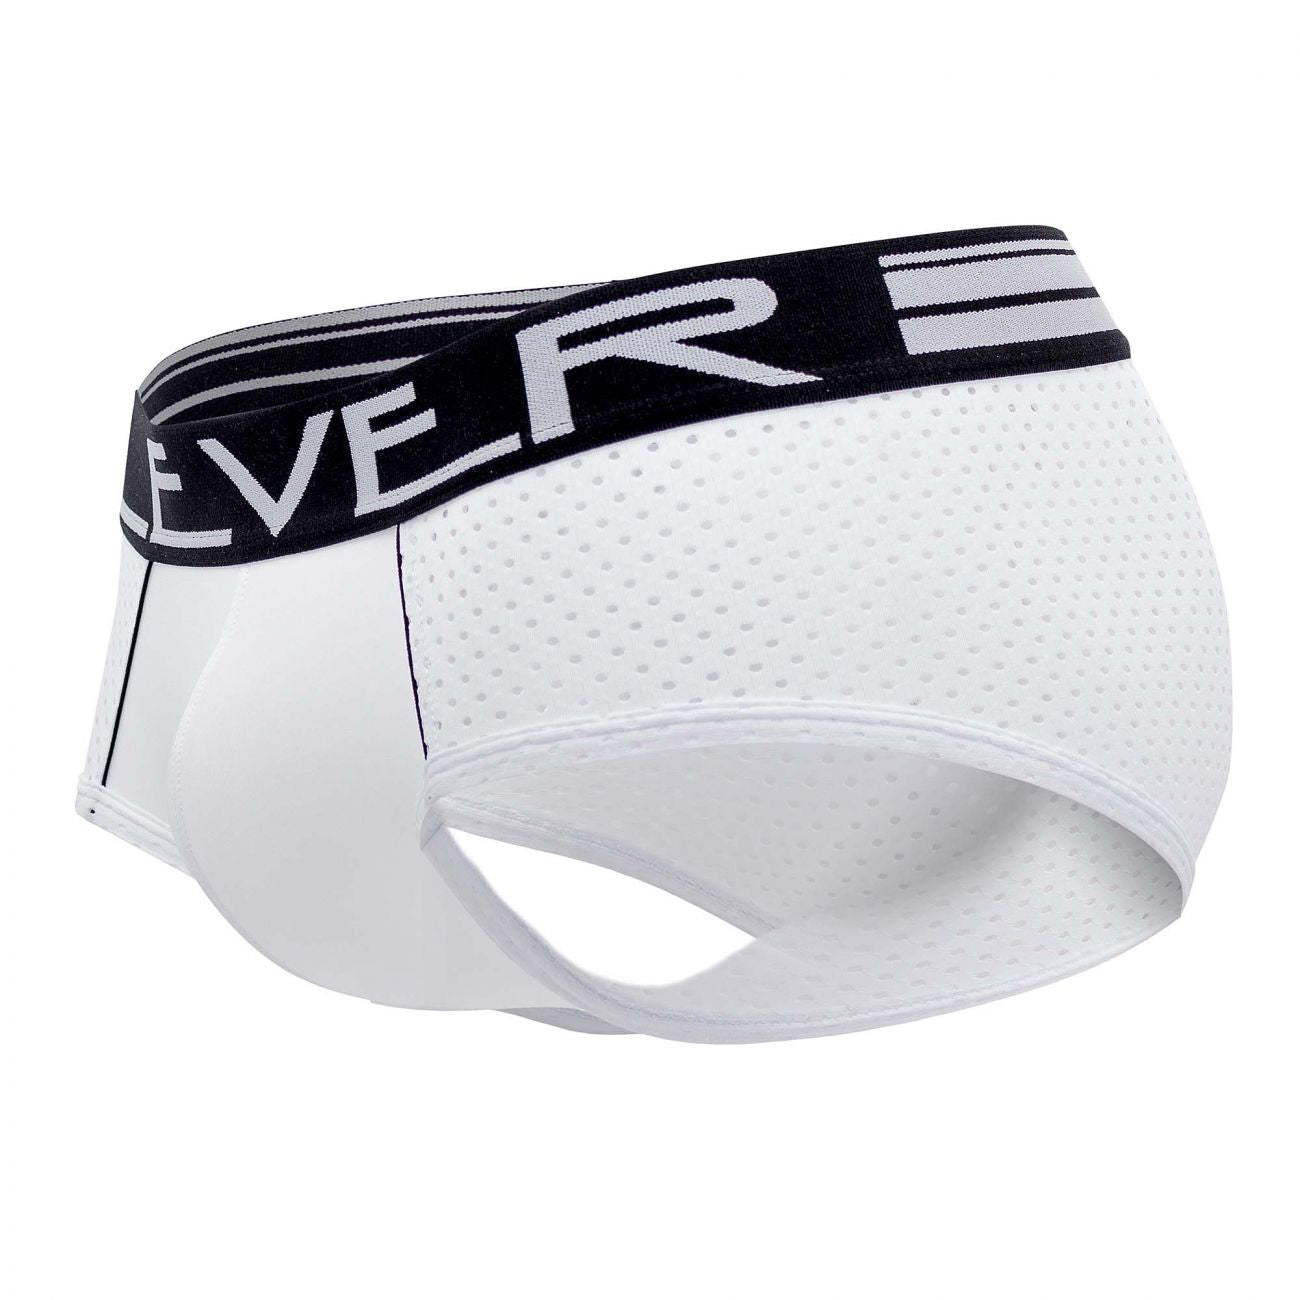 Clever 0362 Strategy Briefs White